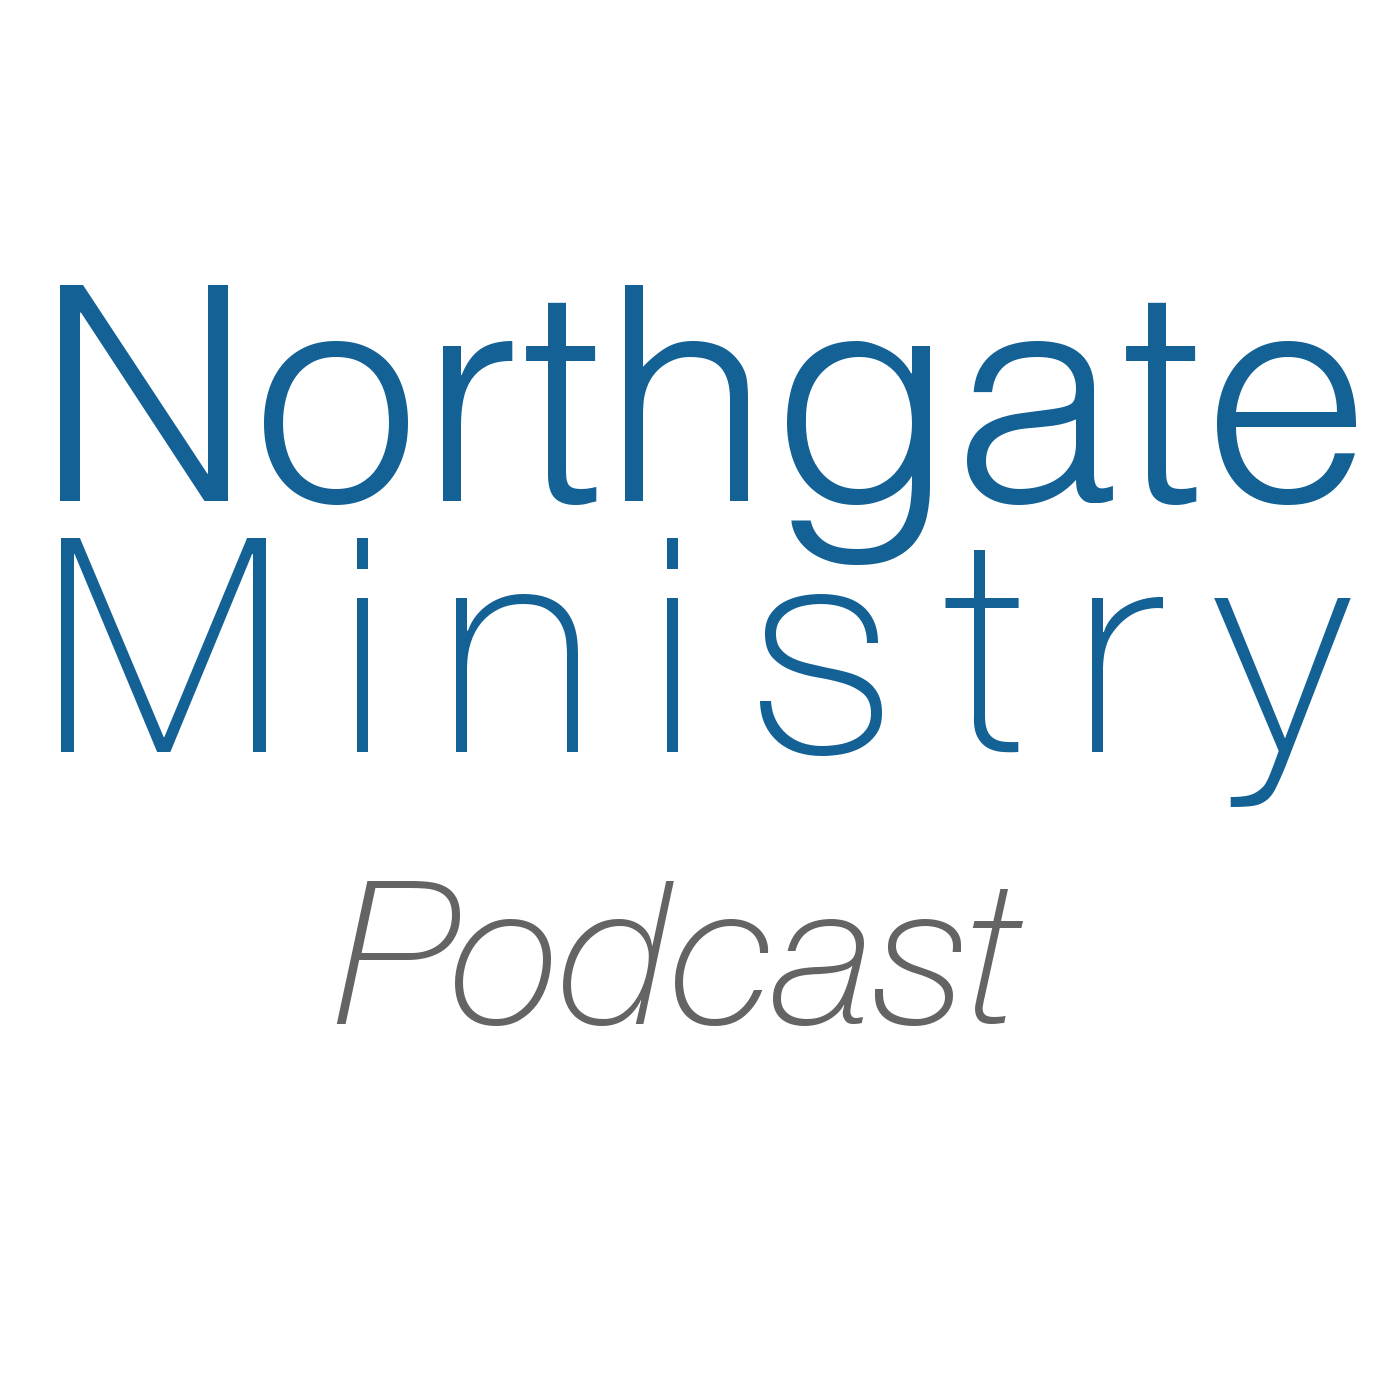 Northgate Ministry Podcast